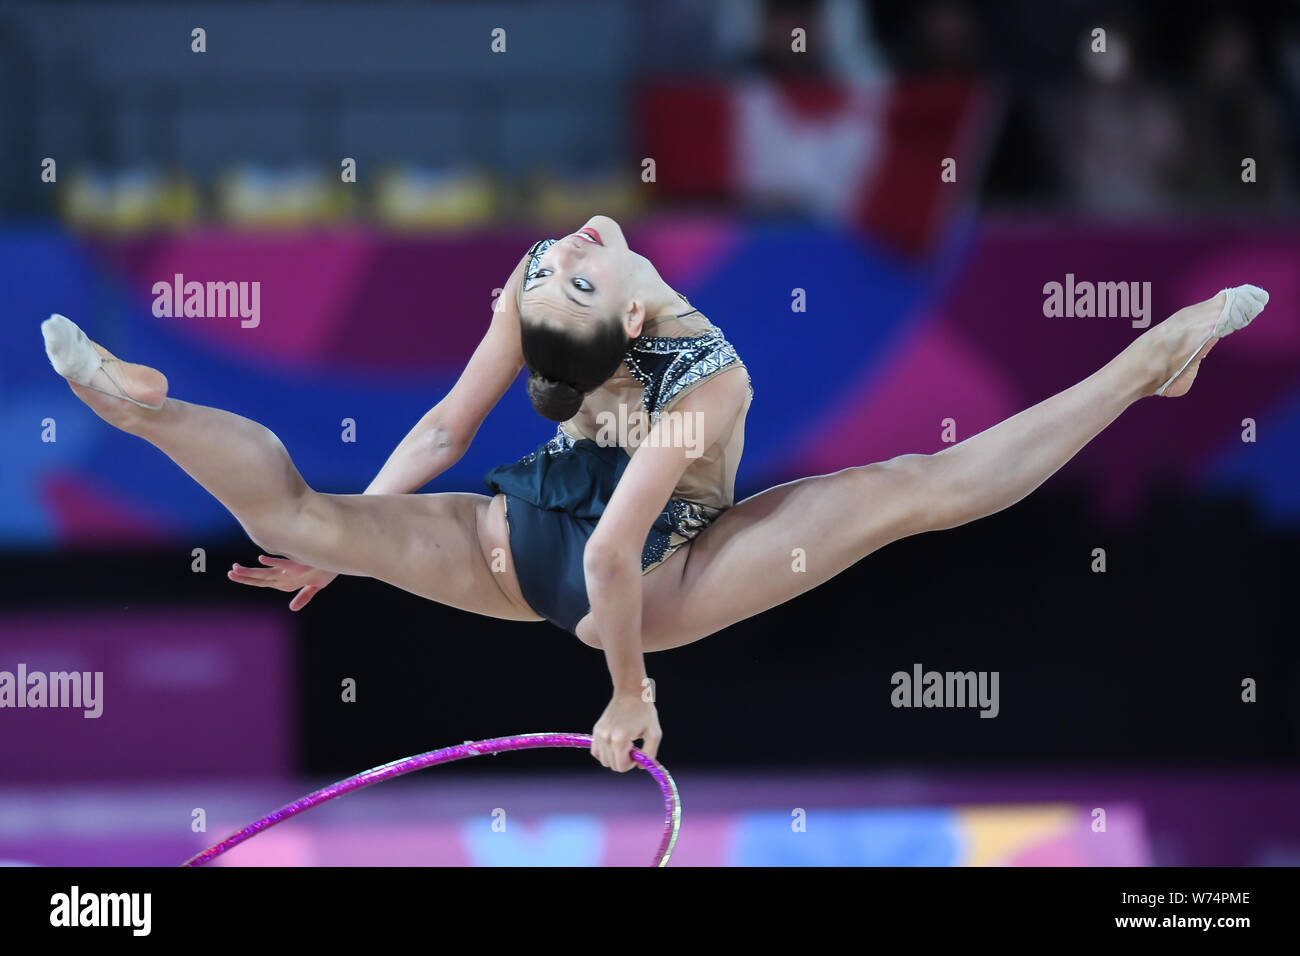 Lima, Peru. 4th Aug, 2019. EVITA GRISKENAS from the US does a leap with the hoop during the competition held in the Polideportivo Villa El Salvador in Lima, Peru. Credit: Amy Sanderson/ZUMA Wire/Alamy Live News Stock Photo